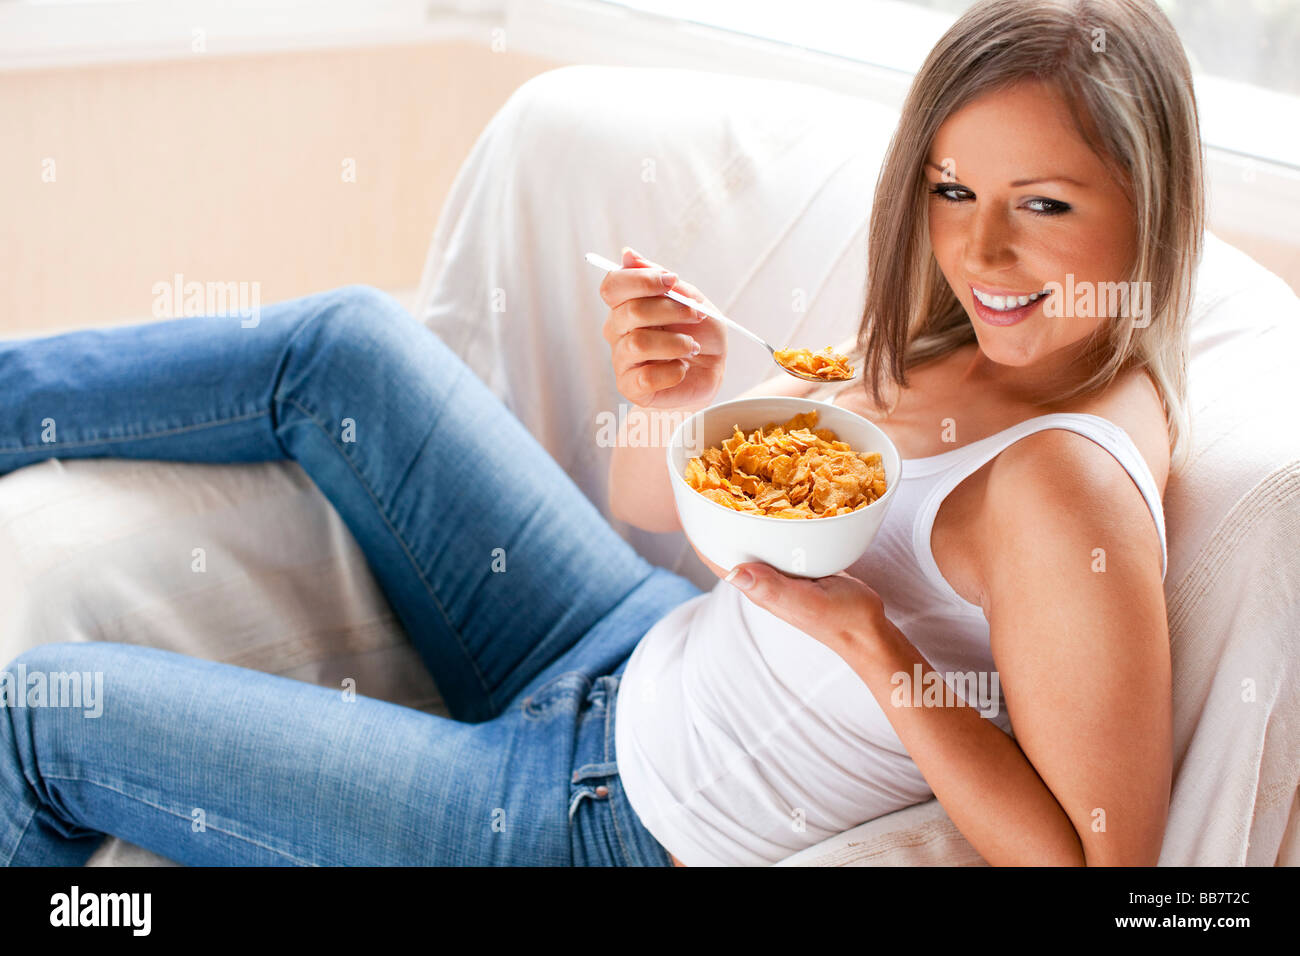 Les cornflakes Girl eating breakfast Banque D'Images